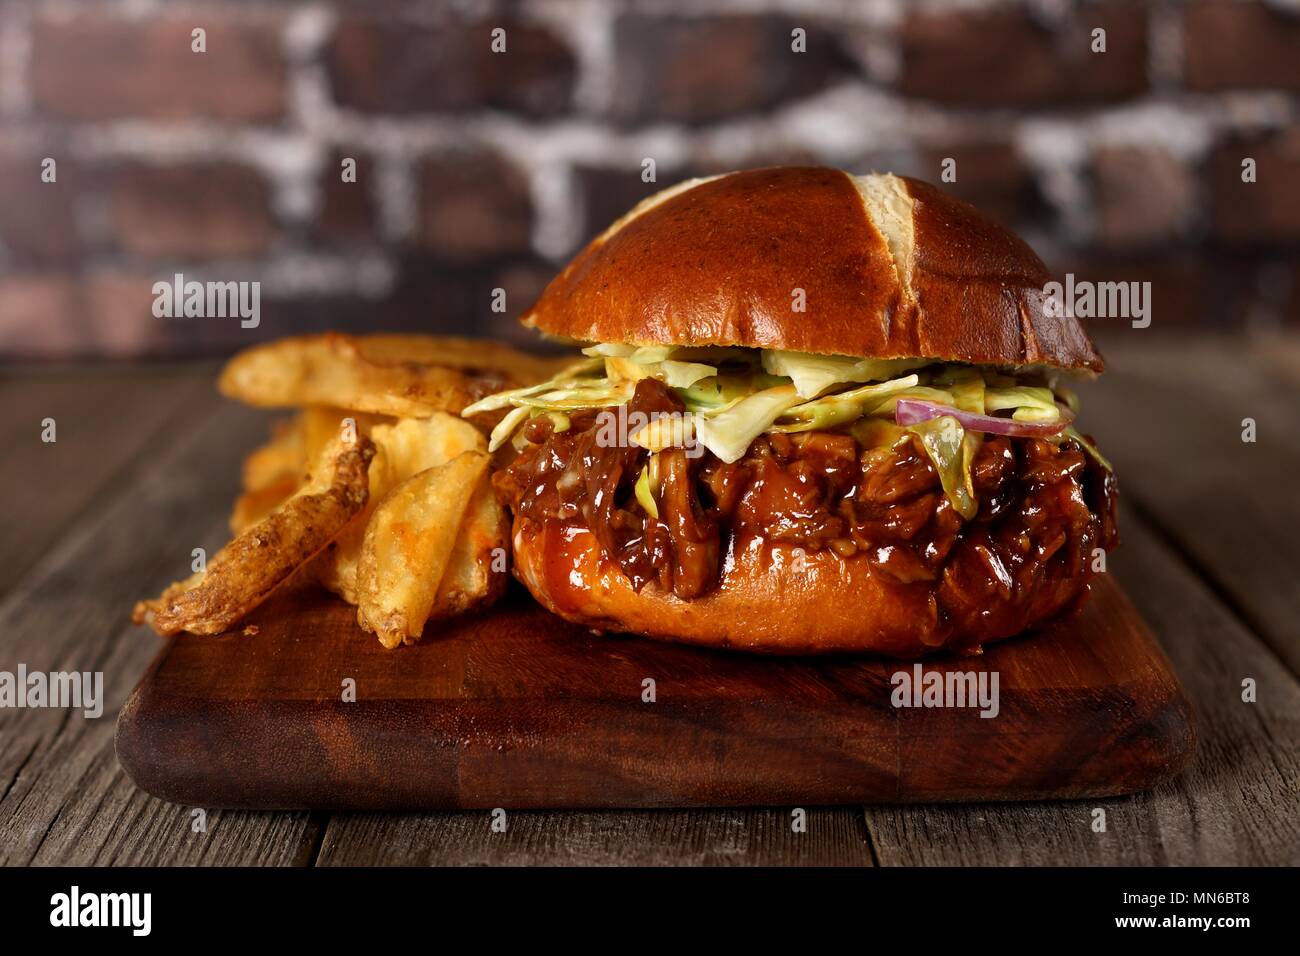 Pulled pork burger on pretzel bun with potato wedges on a wood server with brick background Stock Photo